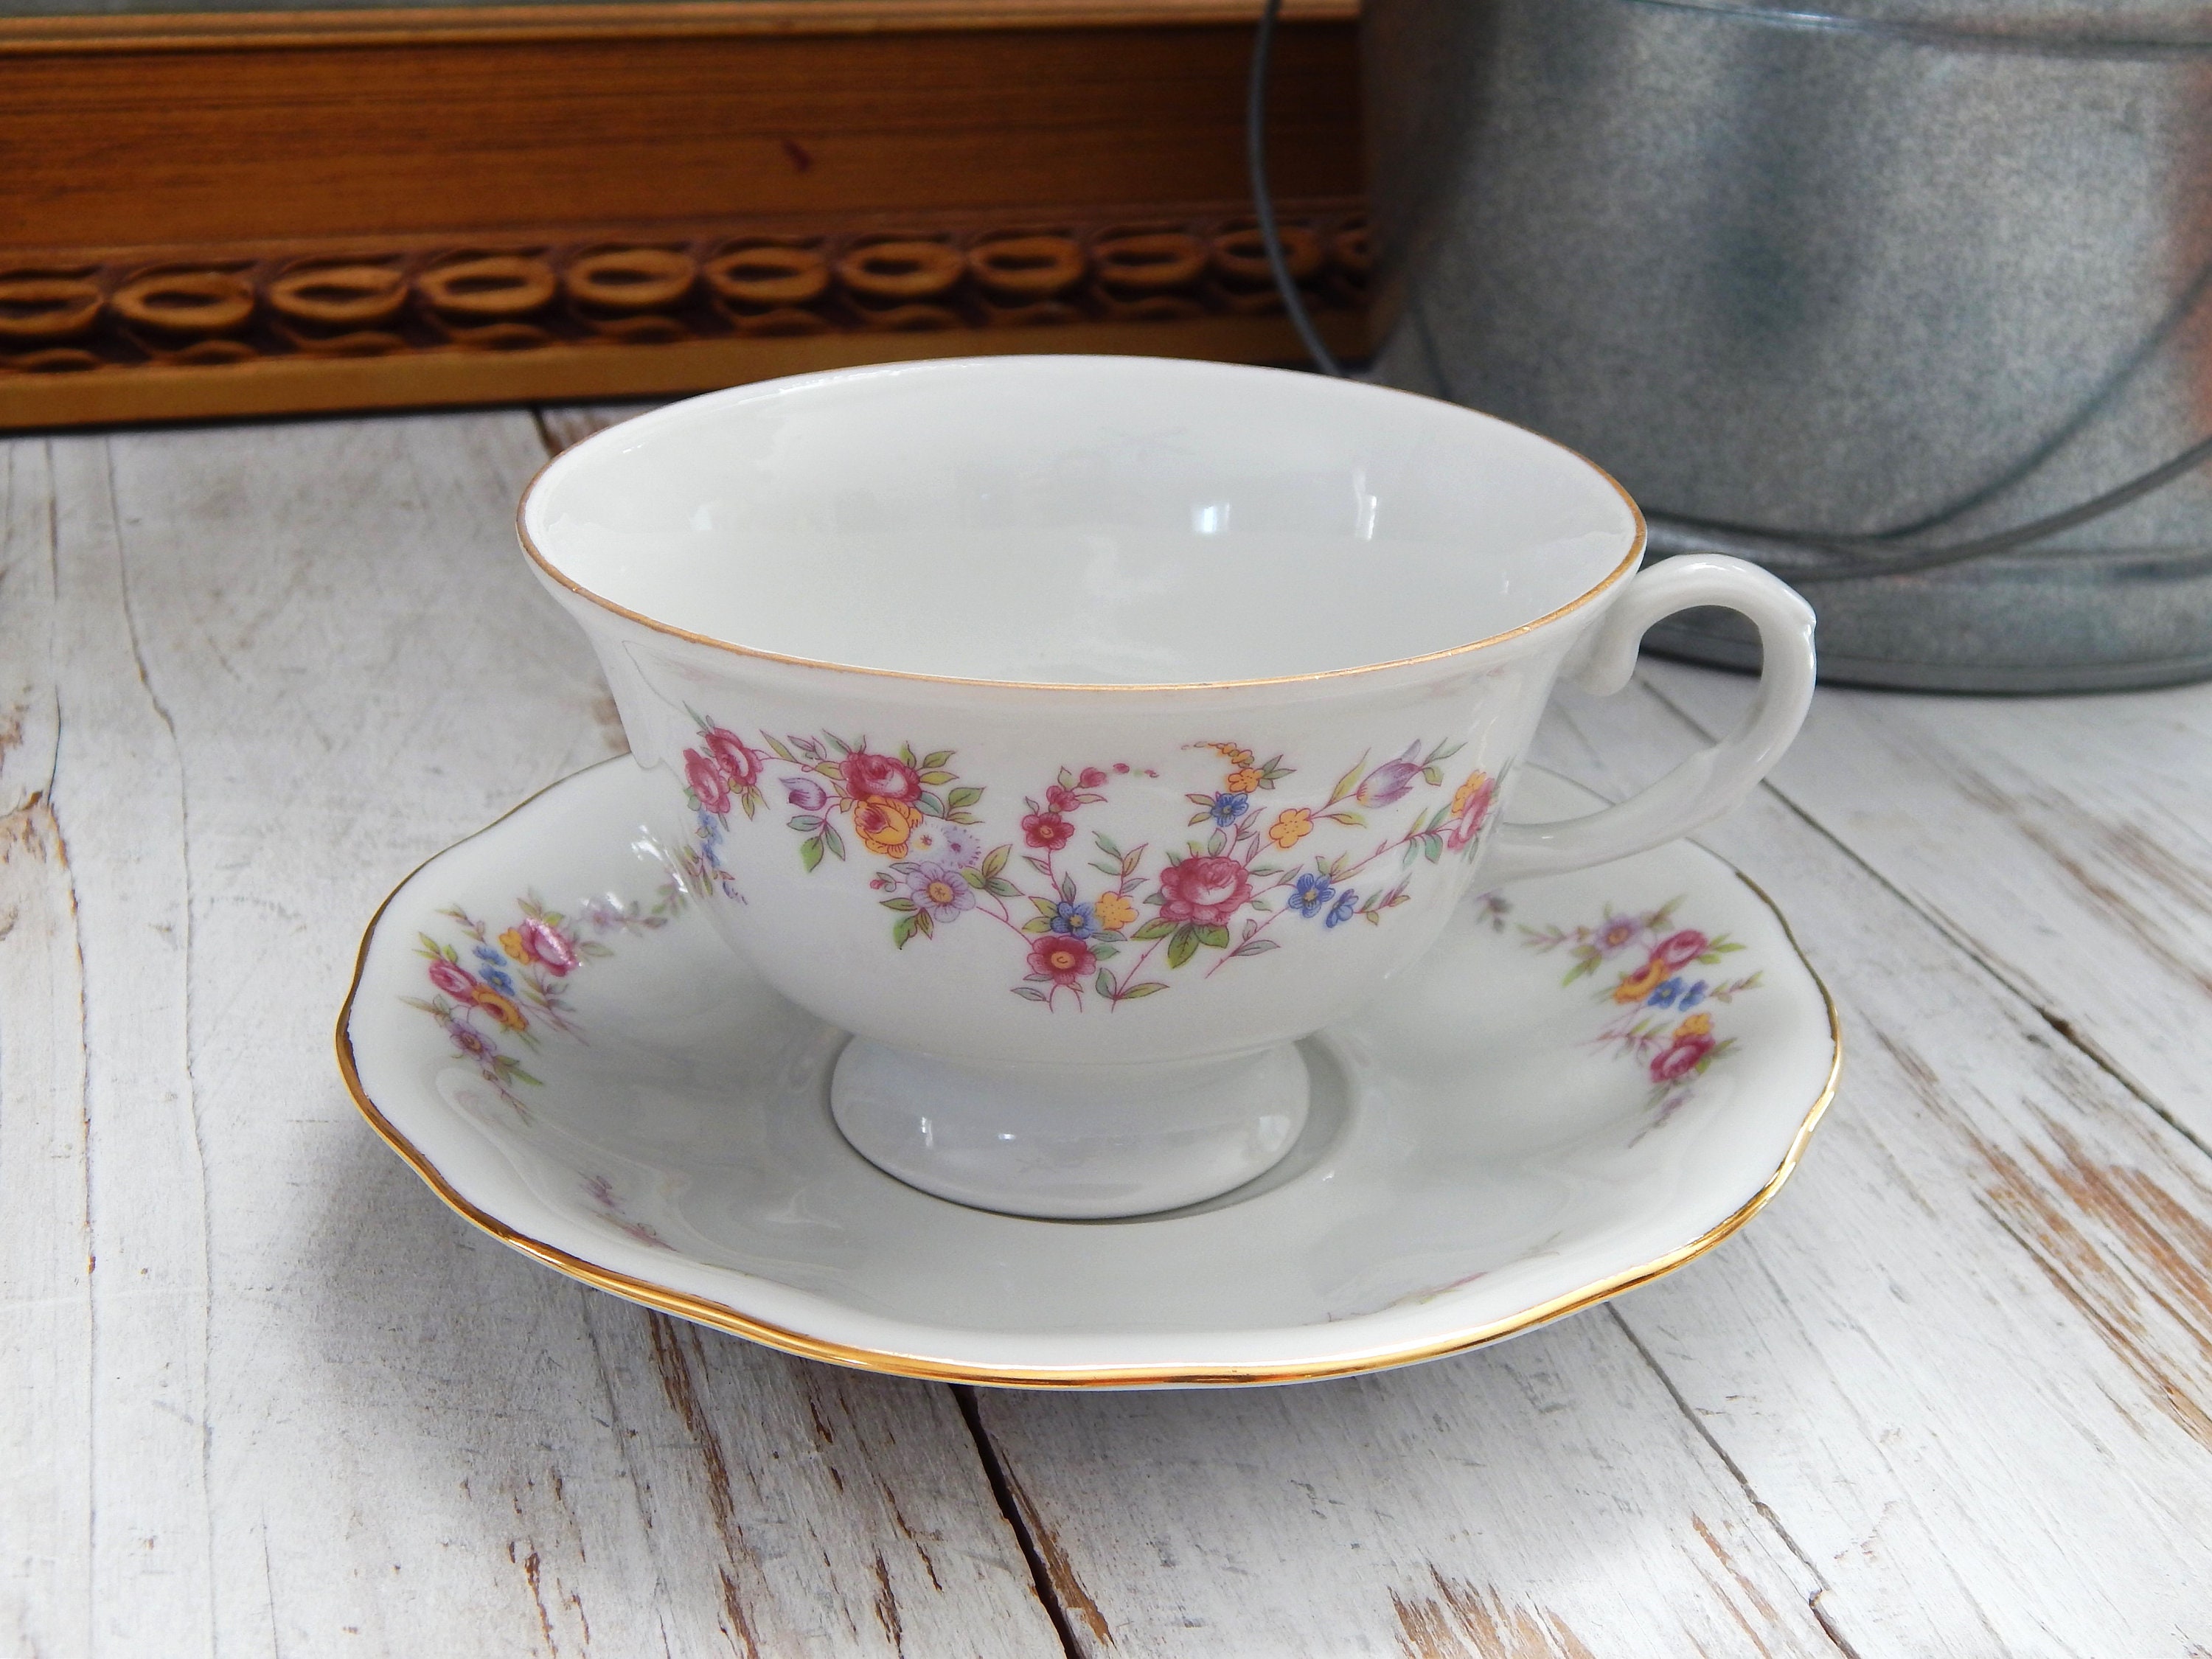 Small Luxury Coffee Cup And Saucer Vintage European Tea Latte Cup